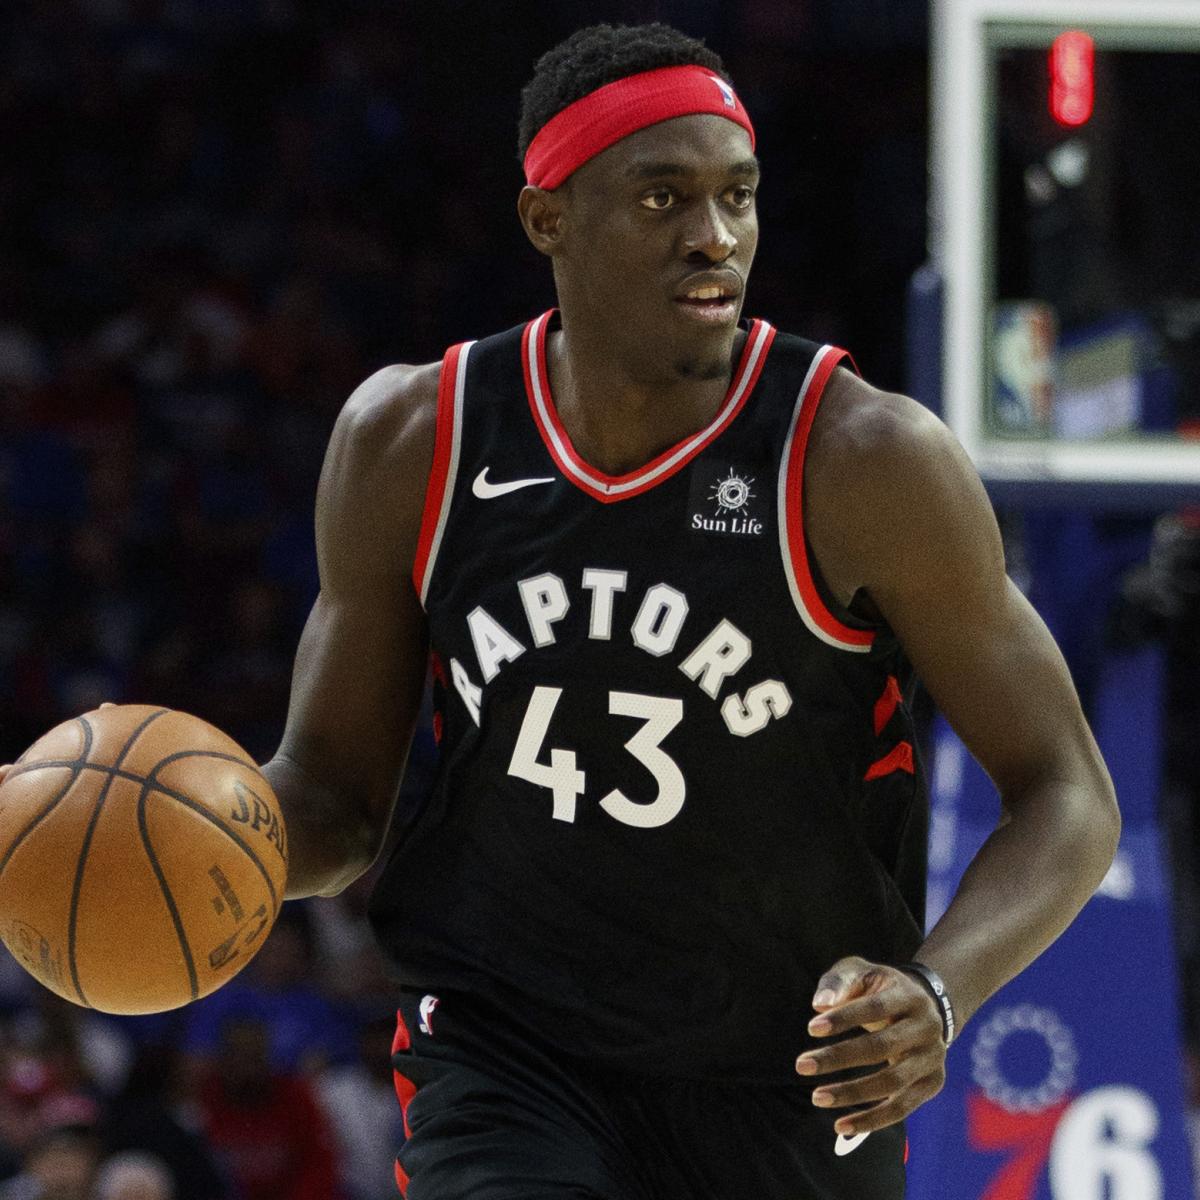 Pascal Siakam Without hurry, Pascal Siakam is quickly emerging as